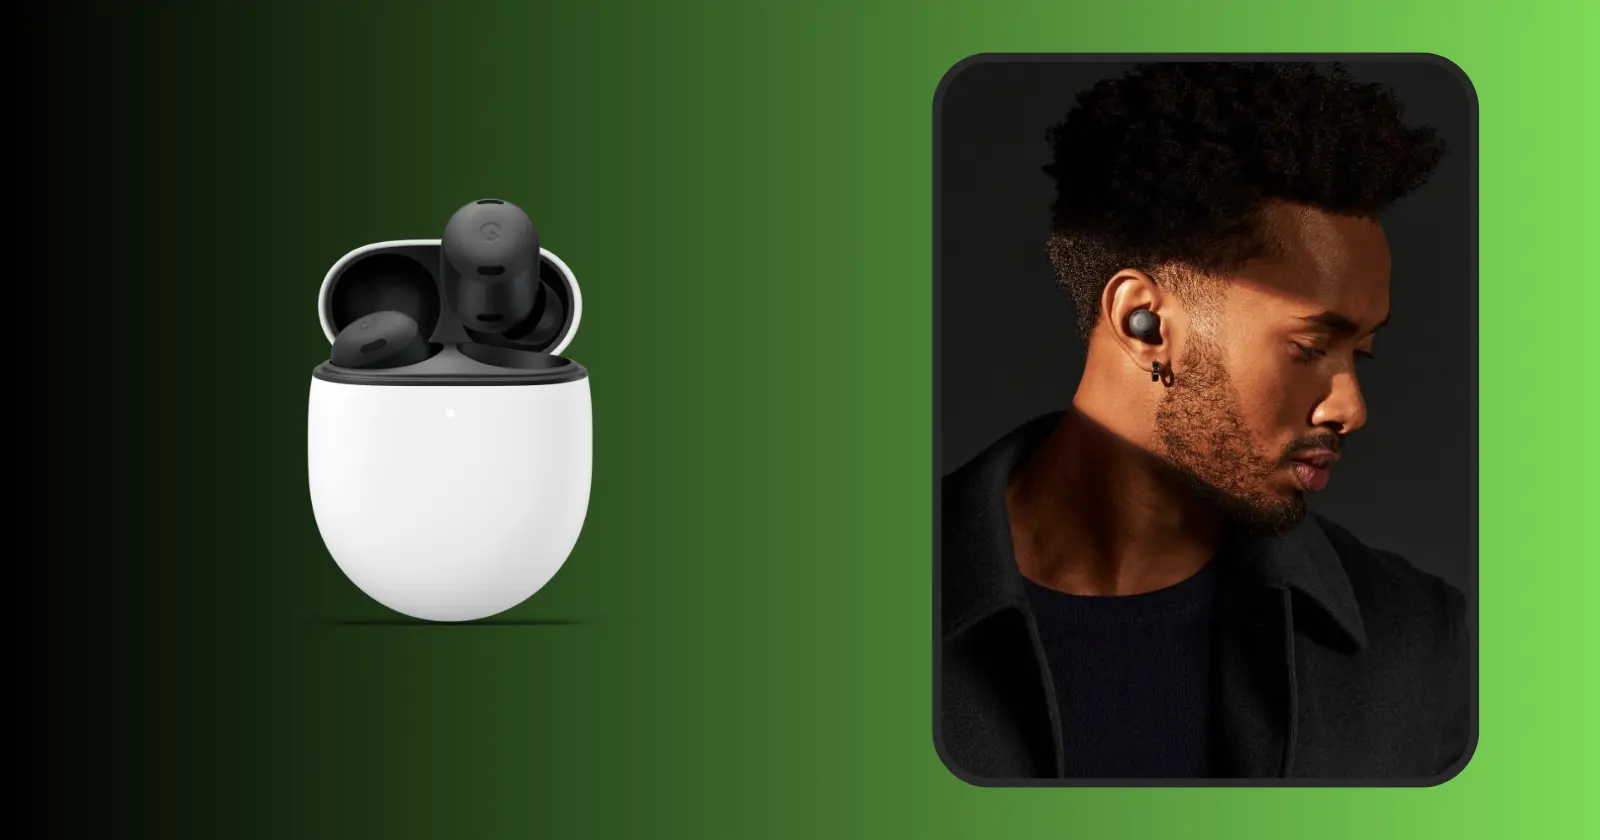 Enhance the Pixel Buds Pro audio experience with these tweaks on your Pixel phone